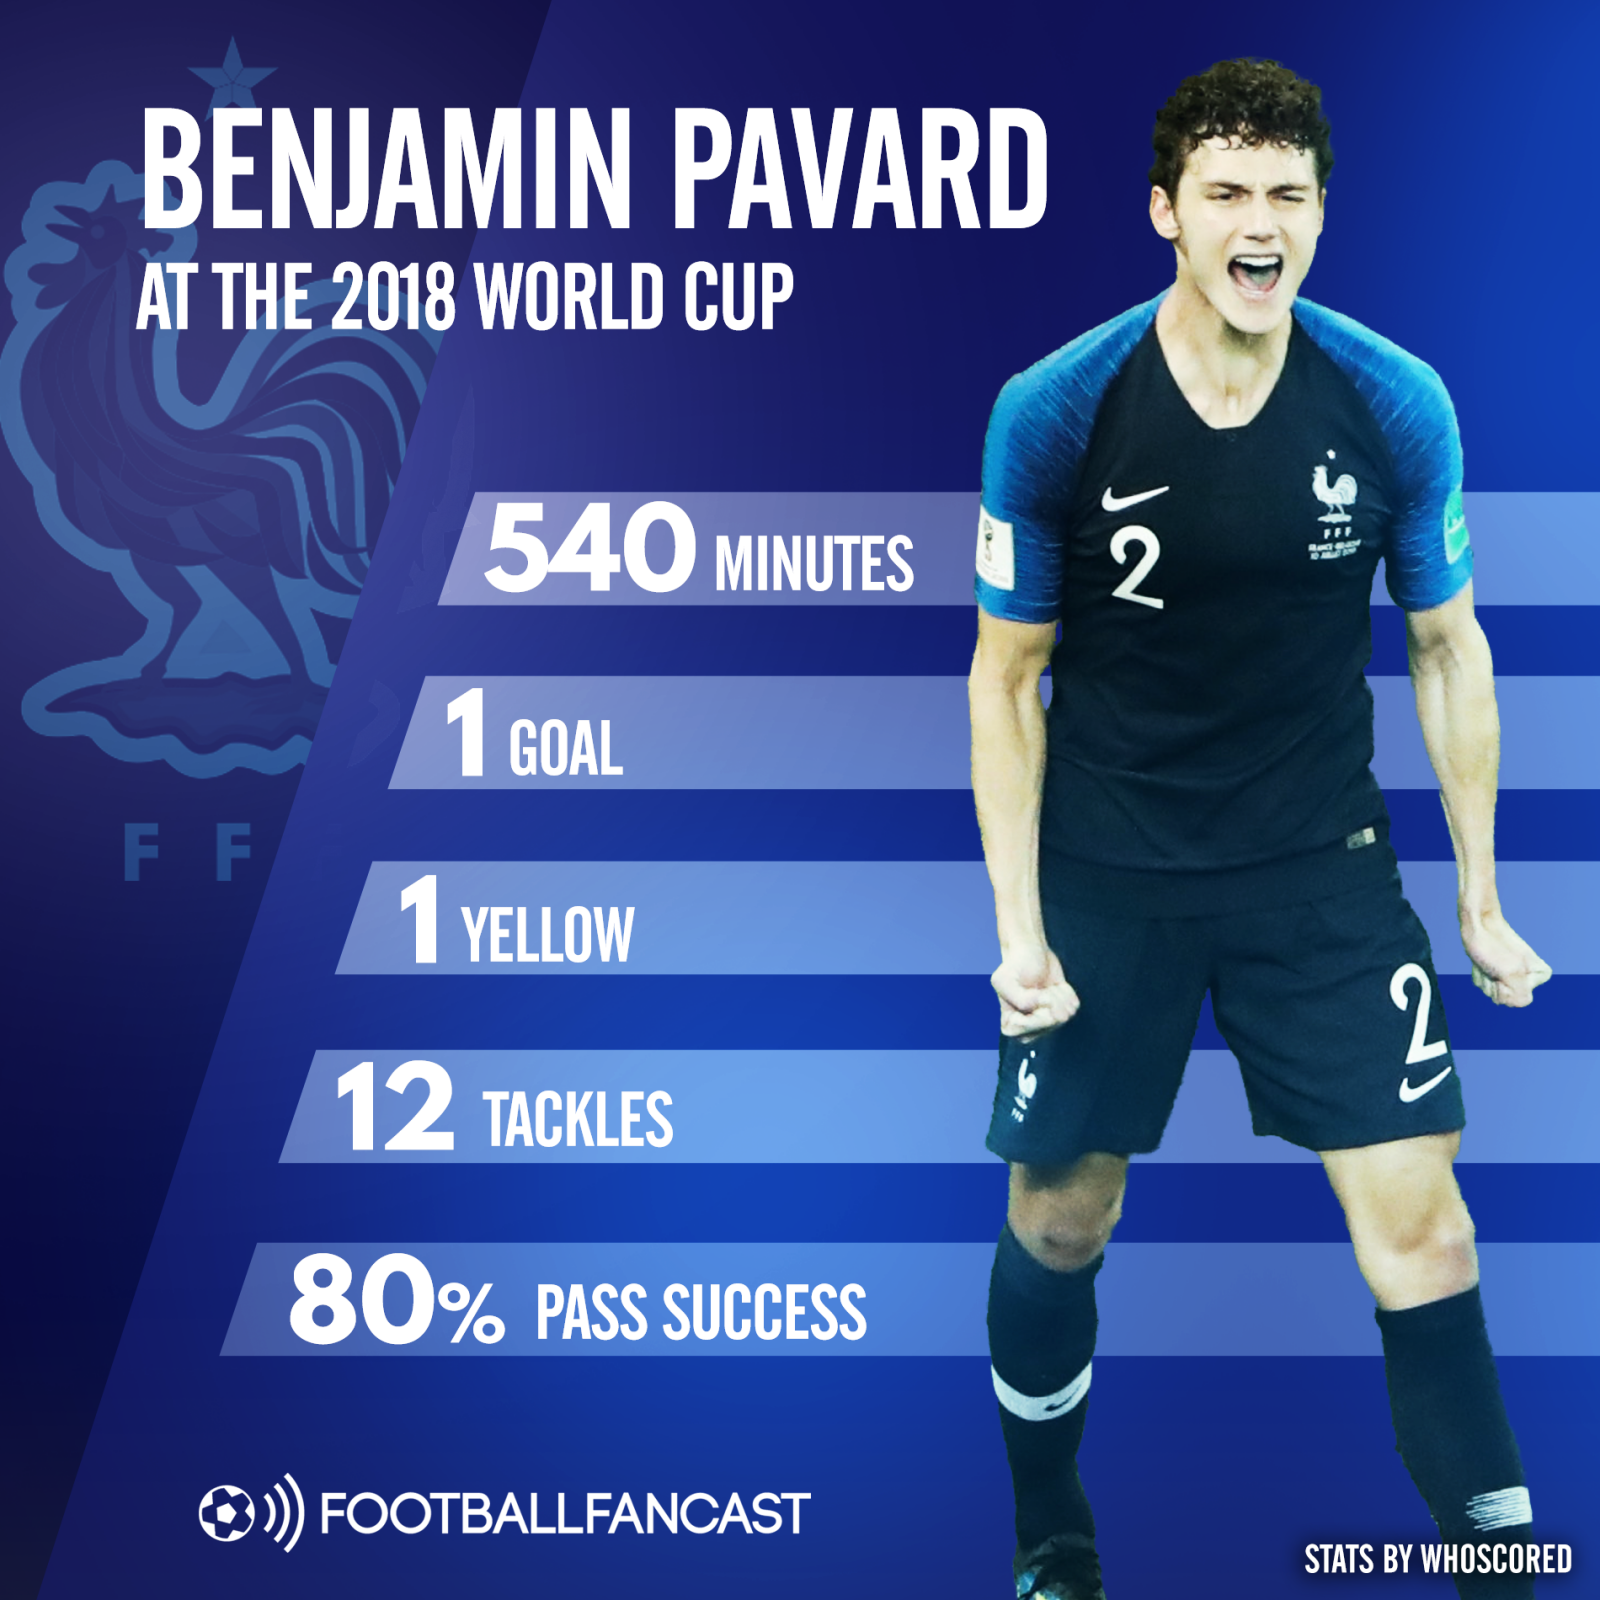 Benjamin Pavard's stats for France at 2018 World Cup